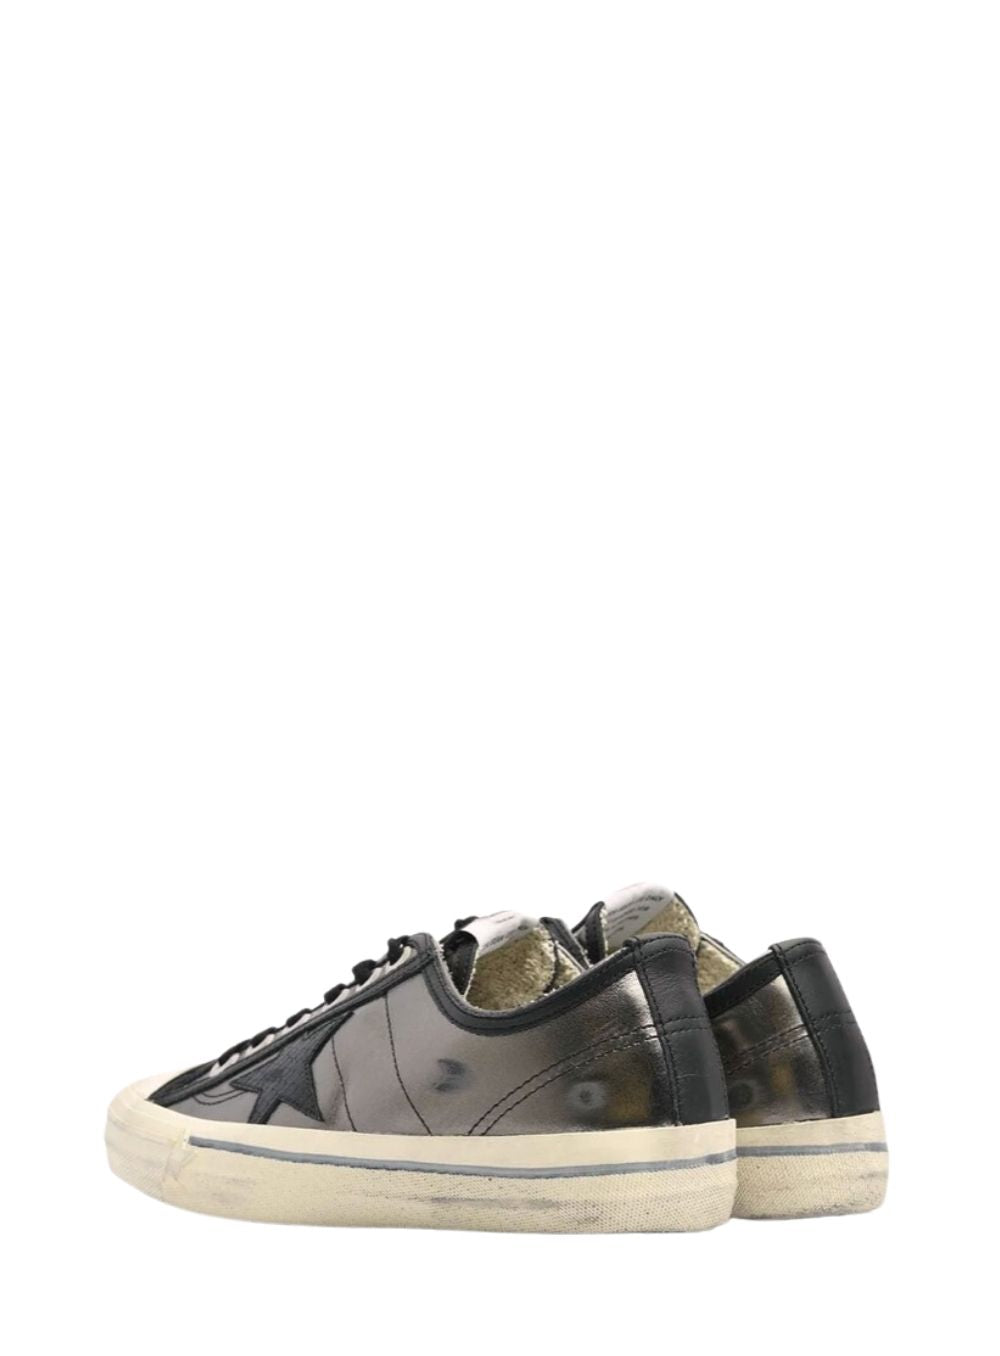 GOLDEN GOOSE | V-Star Laminated Sneakers With Python Print Star – Joan Shepp